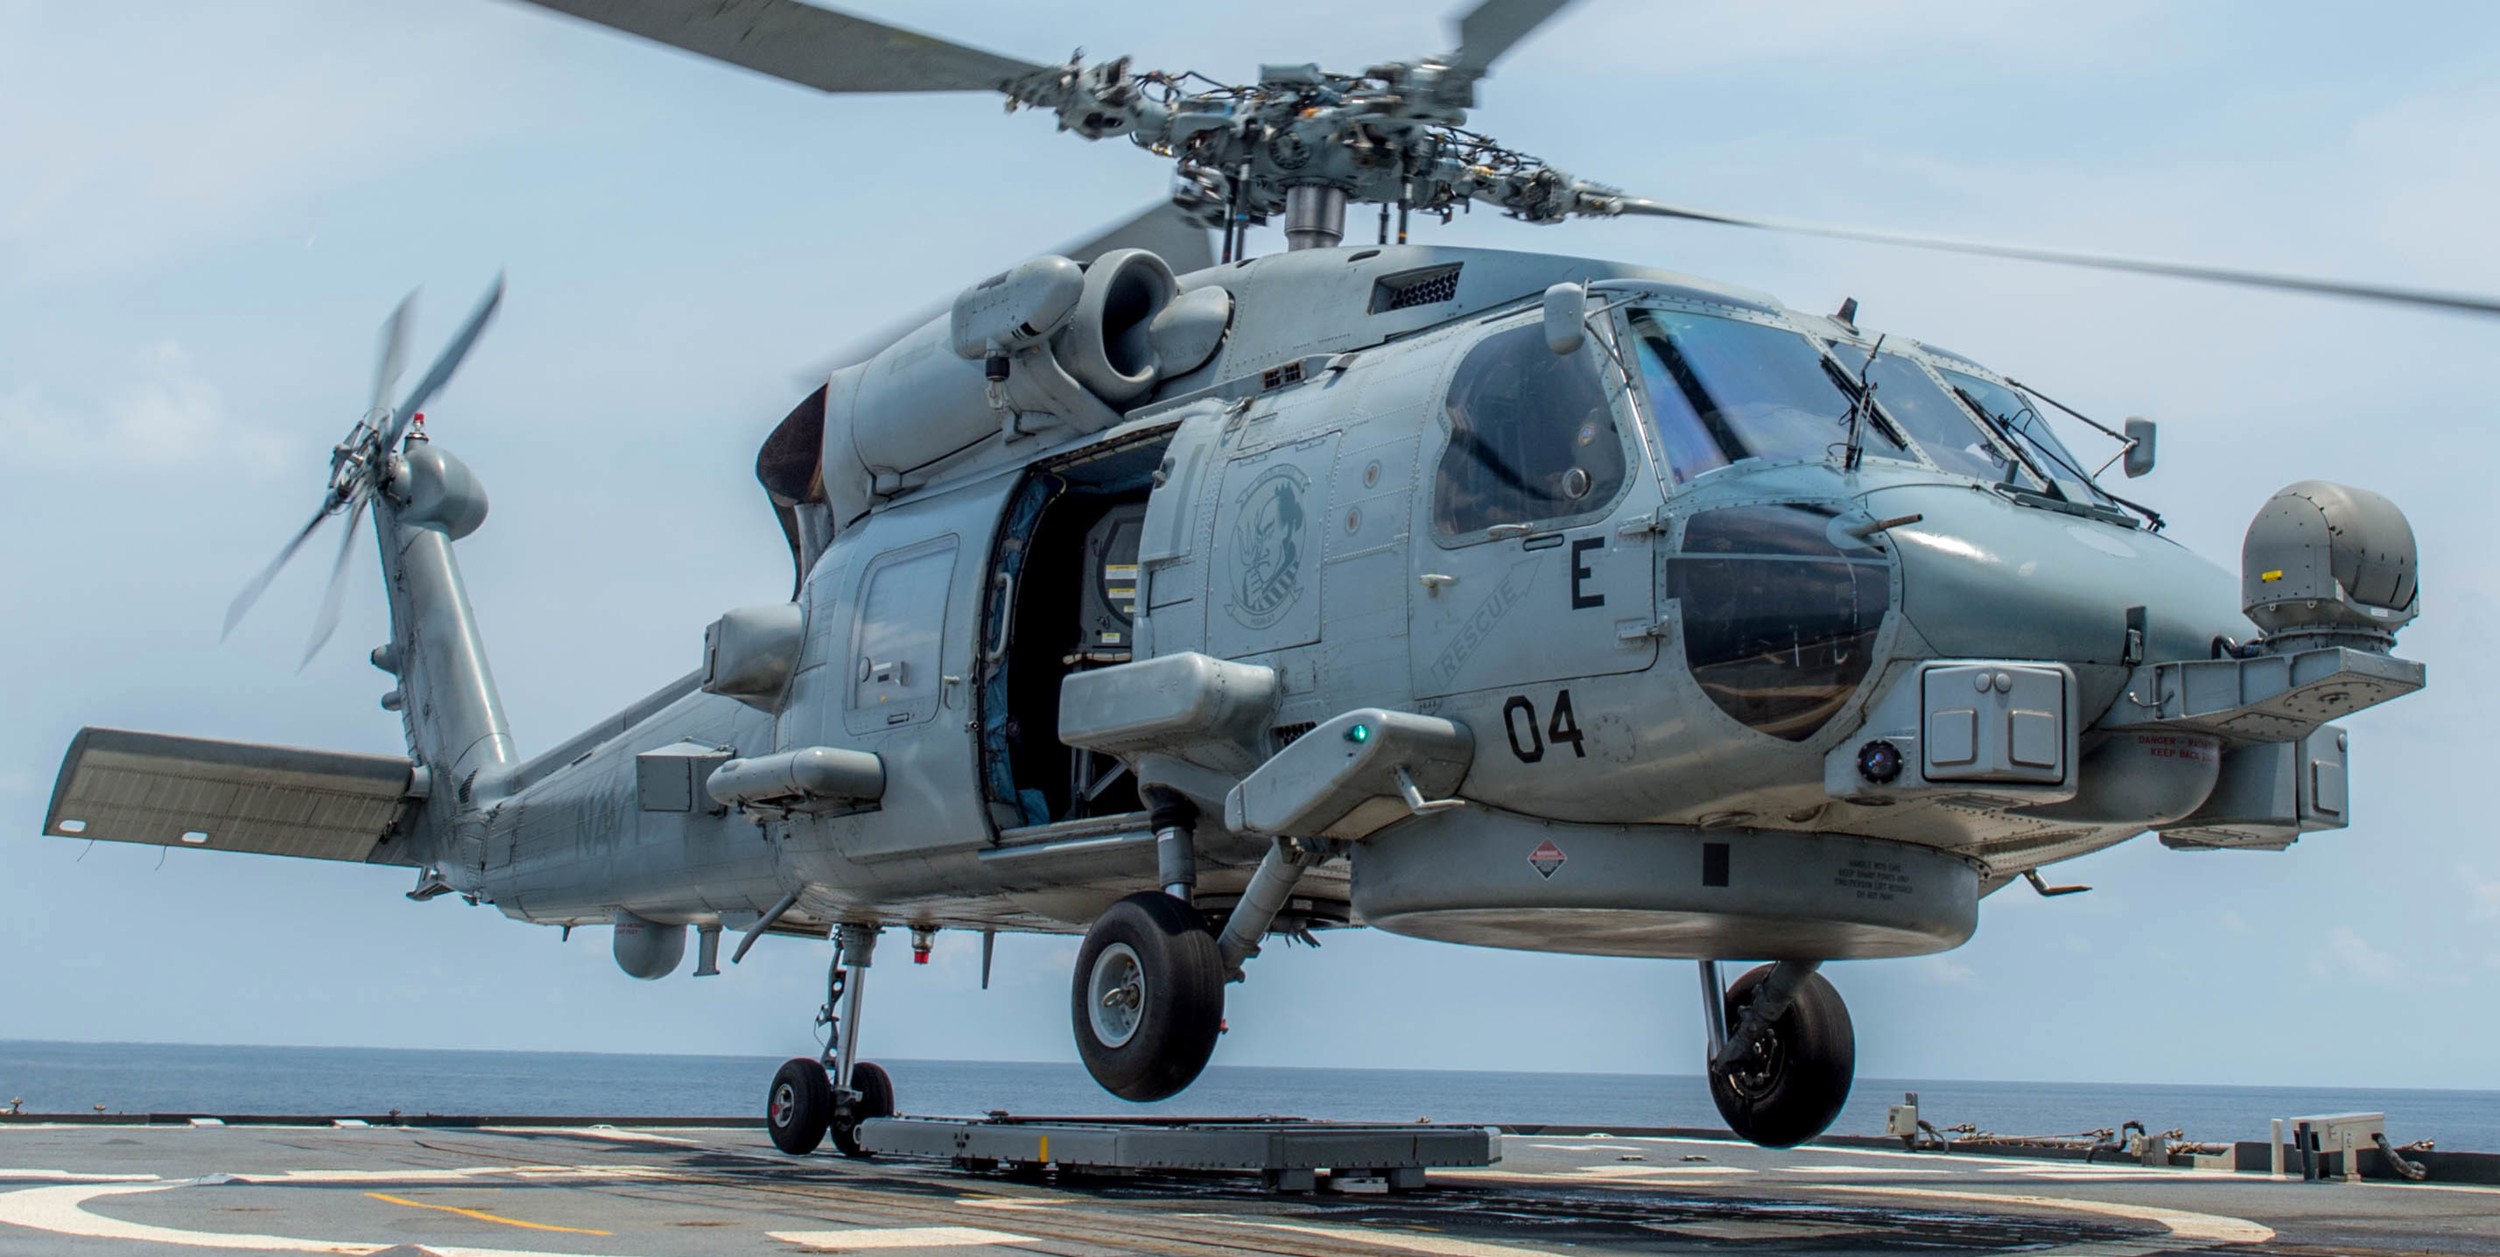 hsm-51 warlords helicopter maritime strike squadron mh-60r seahawk navy 2015 53 uss shiloh cg-67